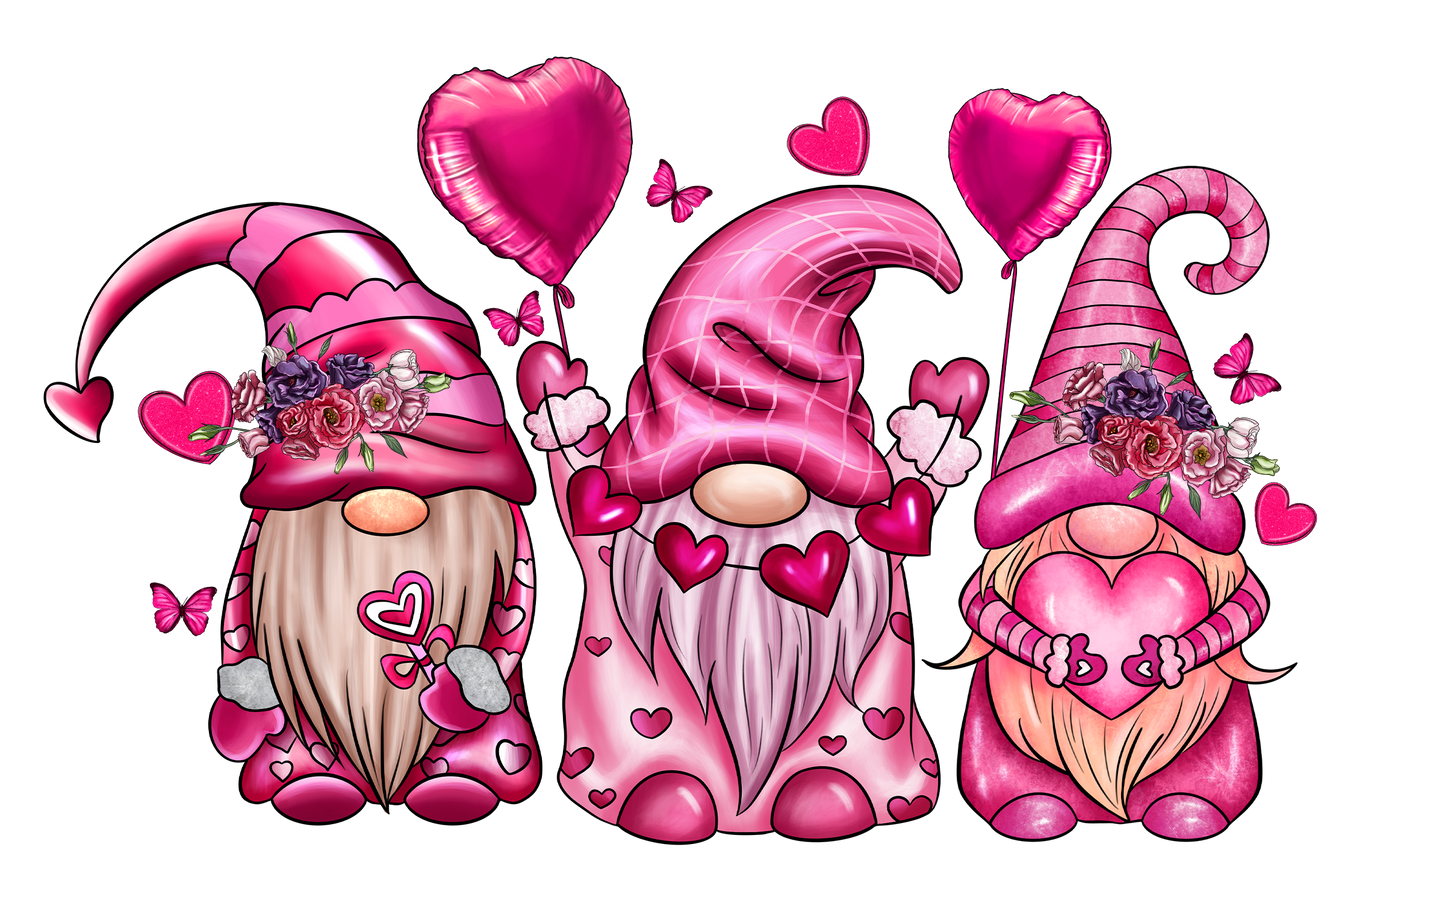 VALENTINES GNOMES WITH HEART BALLOONS